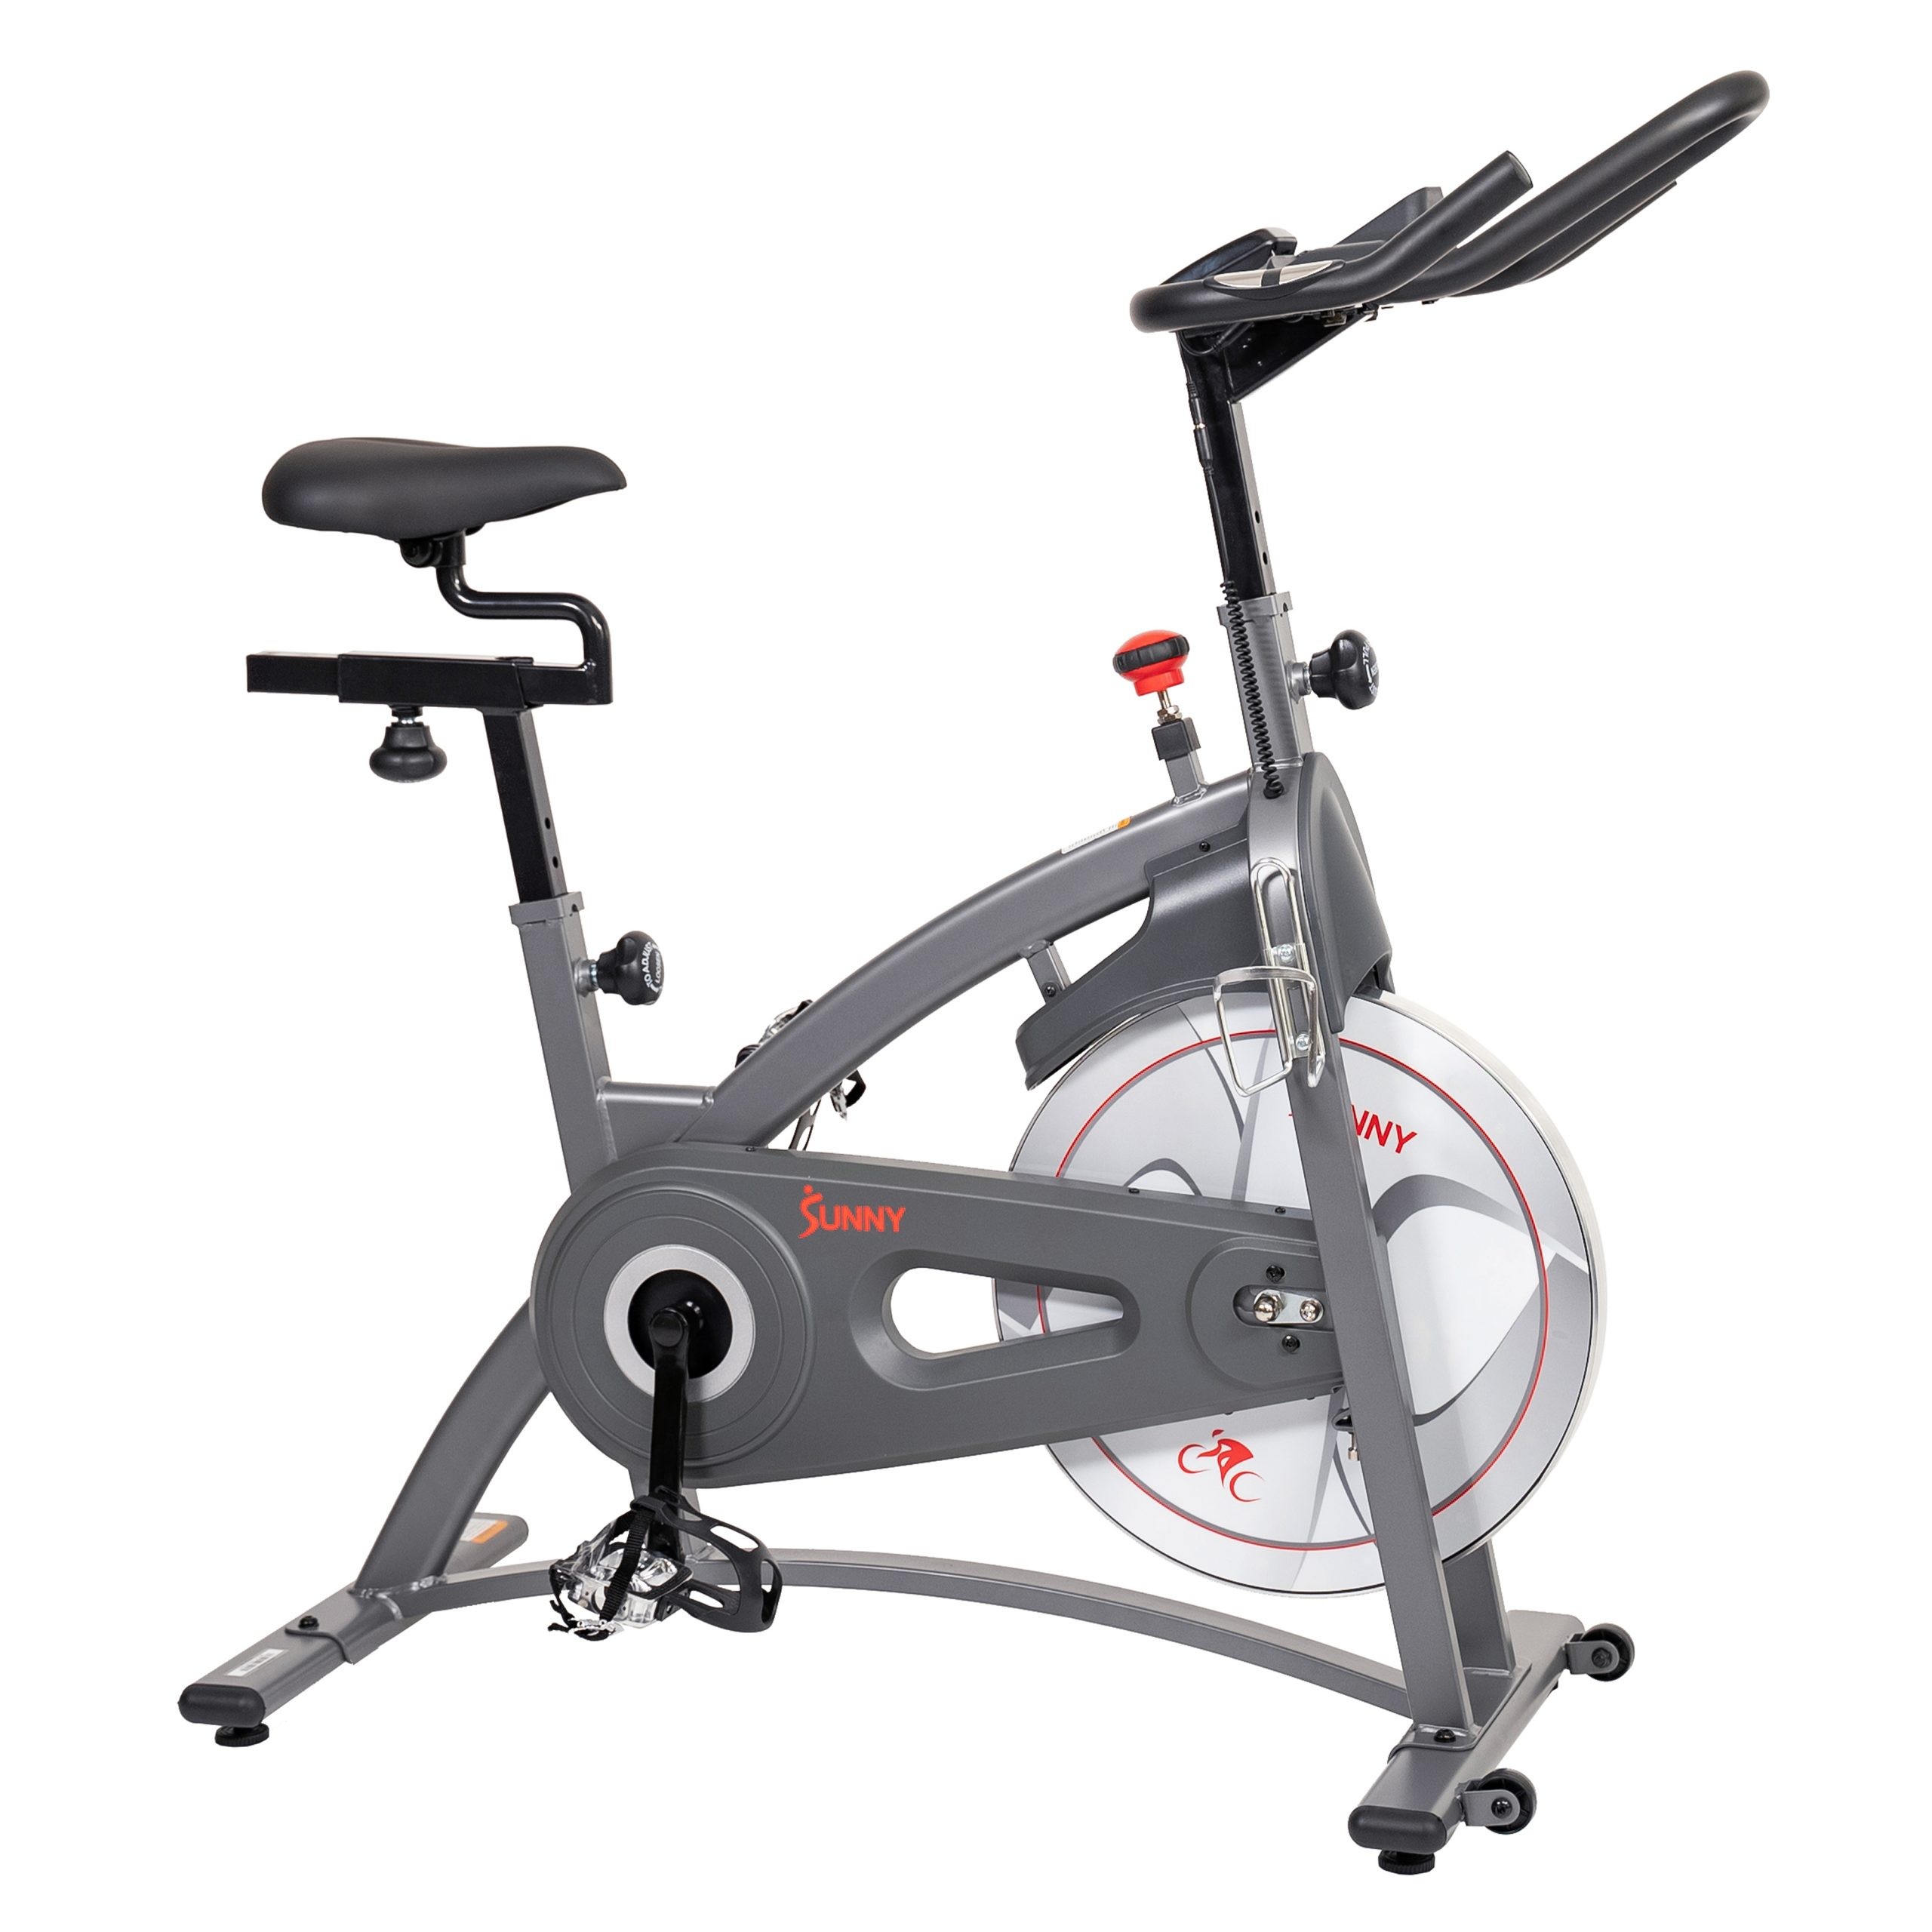 Sunny Health & Fitness Endurance Belt Drive Magnetic Indoor Exercise Cycle Bike – SF-B1877